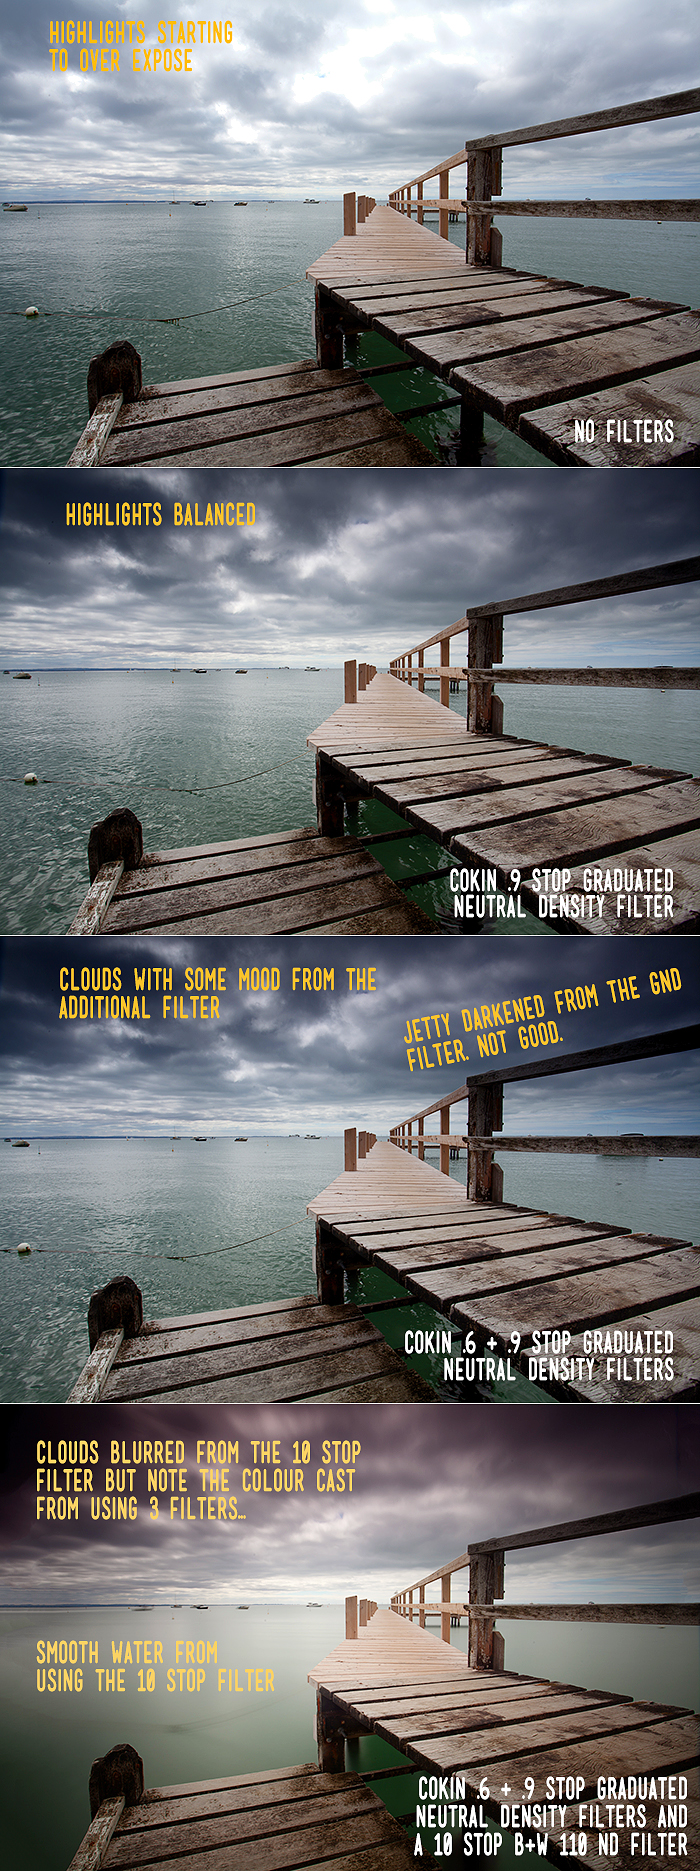 Comparing how neutral density filters can come into play